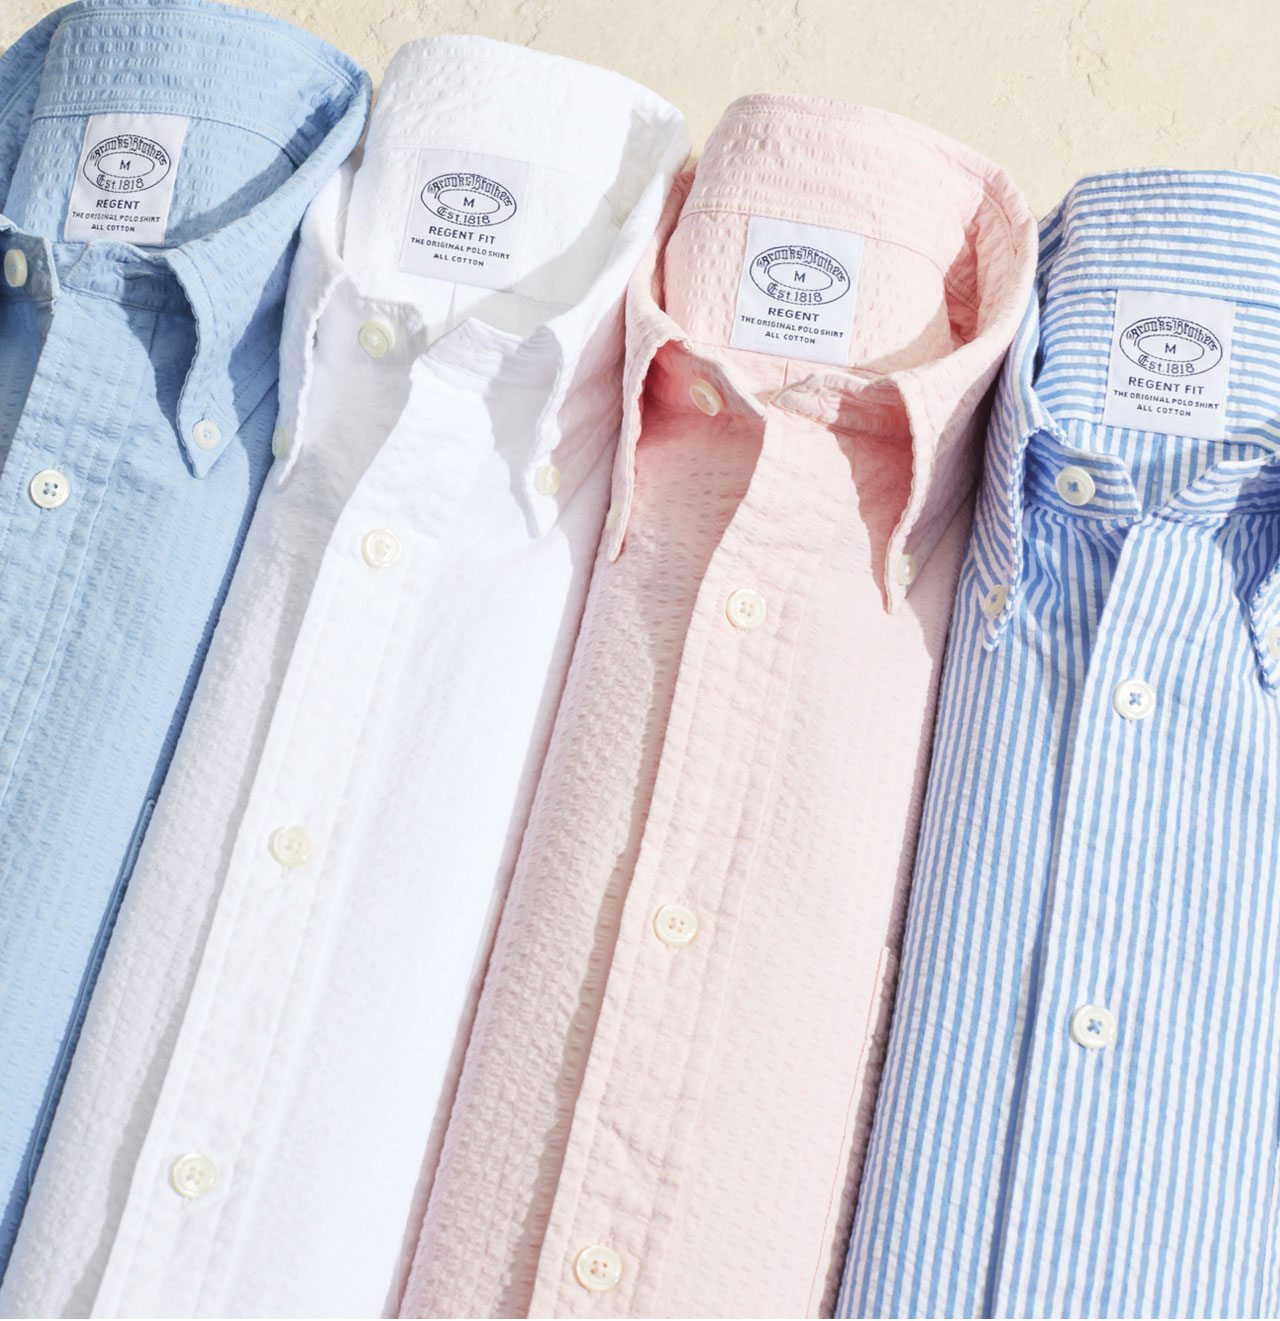 Cool It Hot weathers is here. Dress accordingly with our iconic shirts in breezy summer fabrics - including classic seersucker. 25% off 3 or more